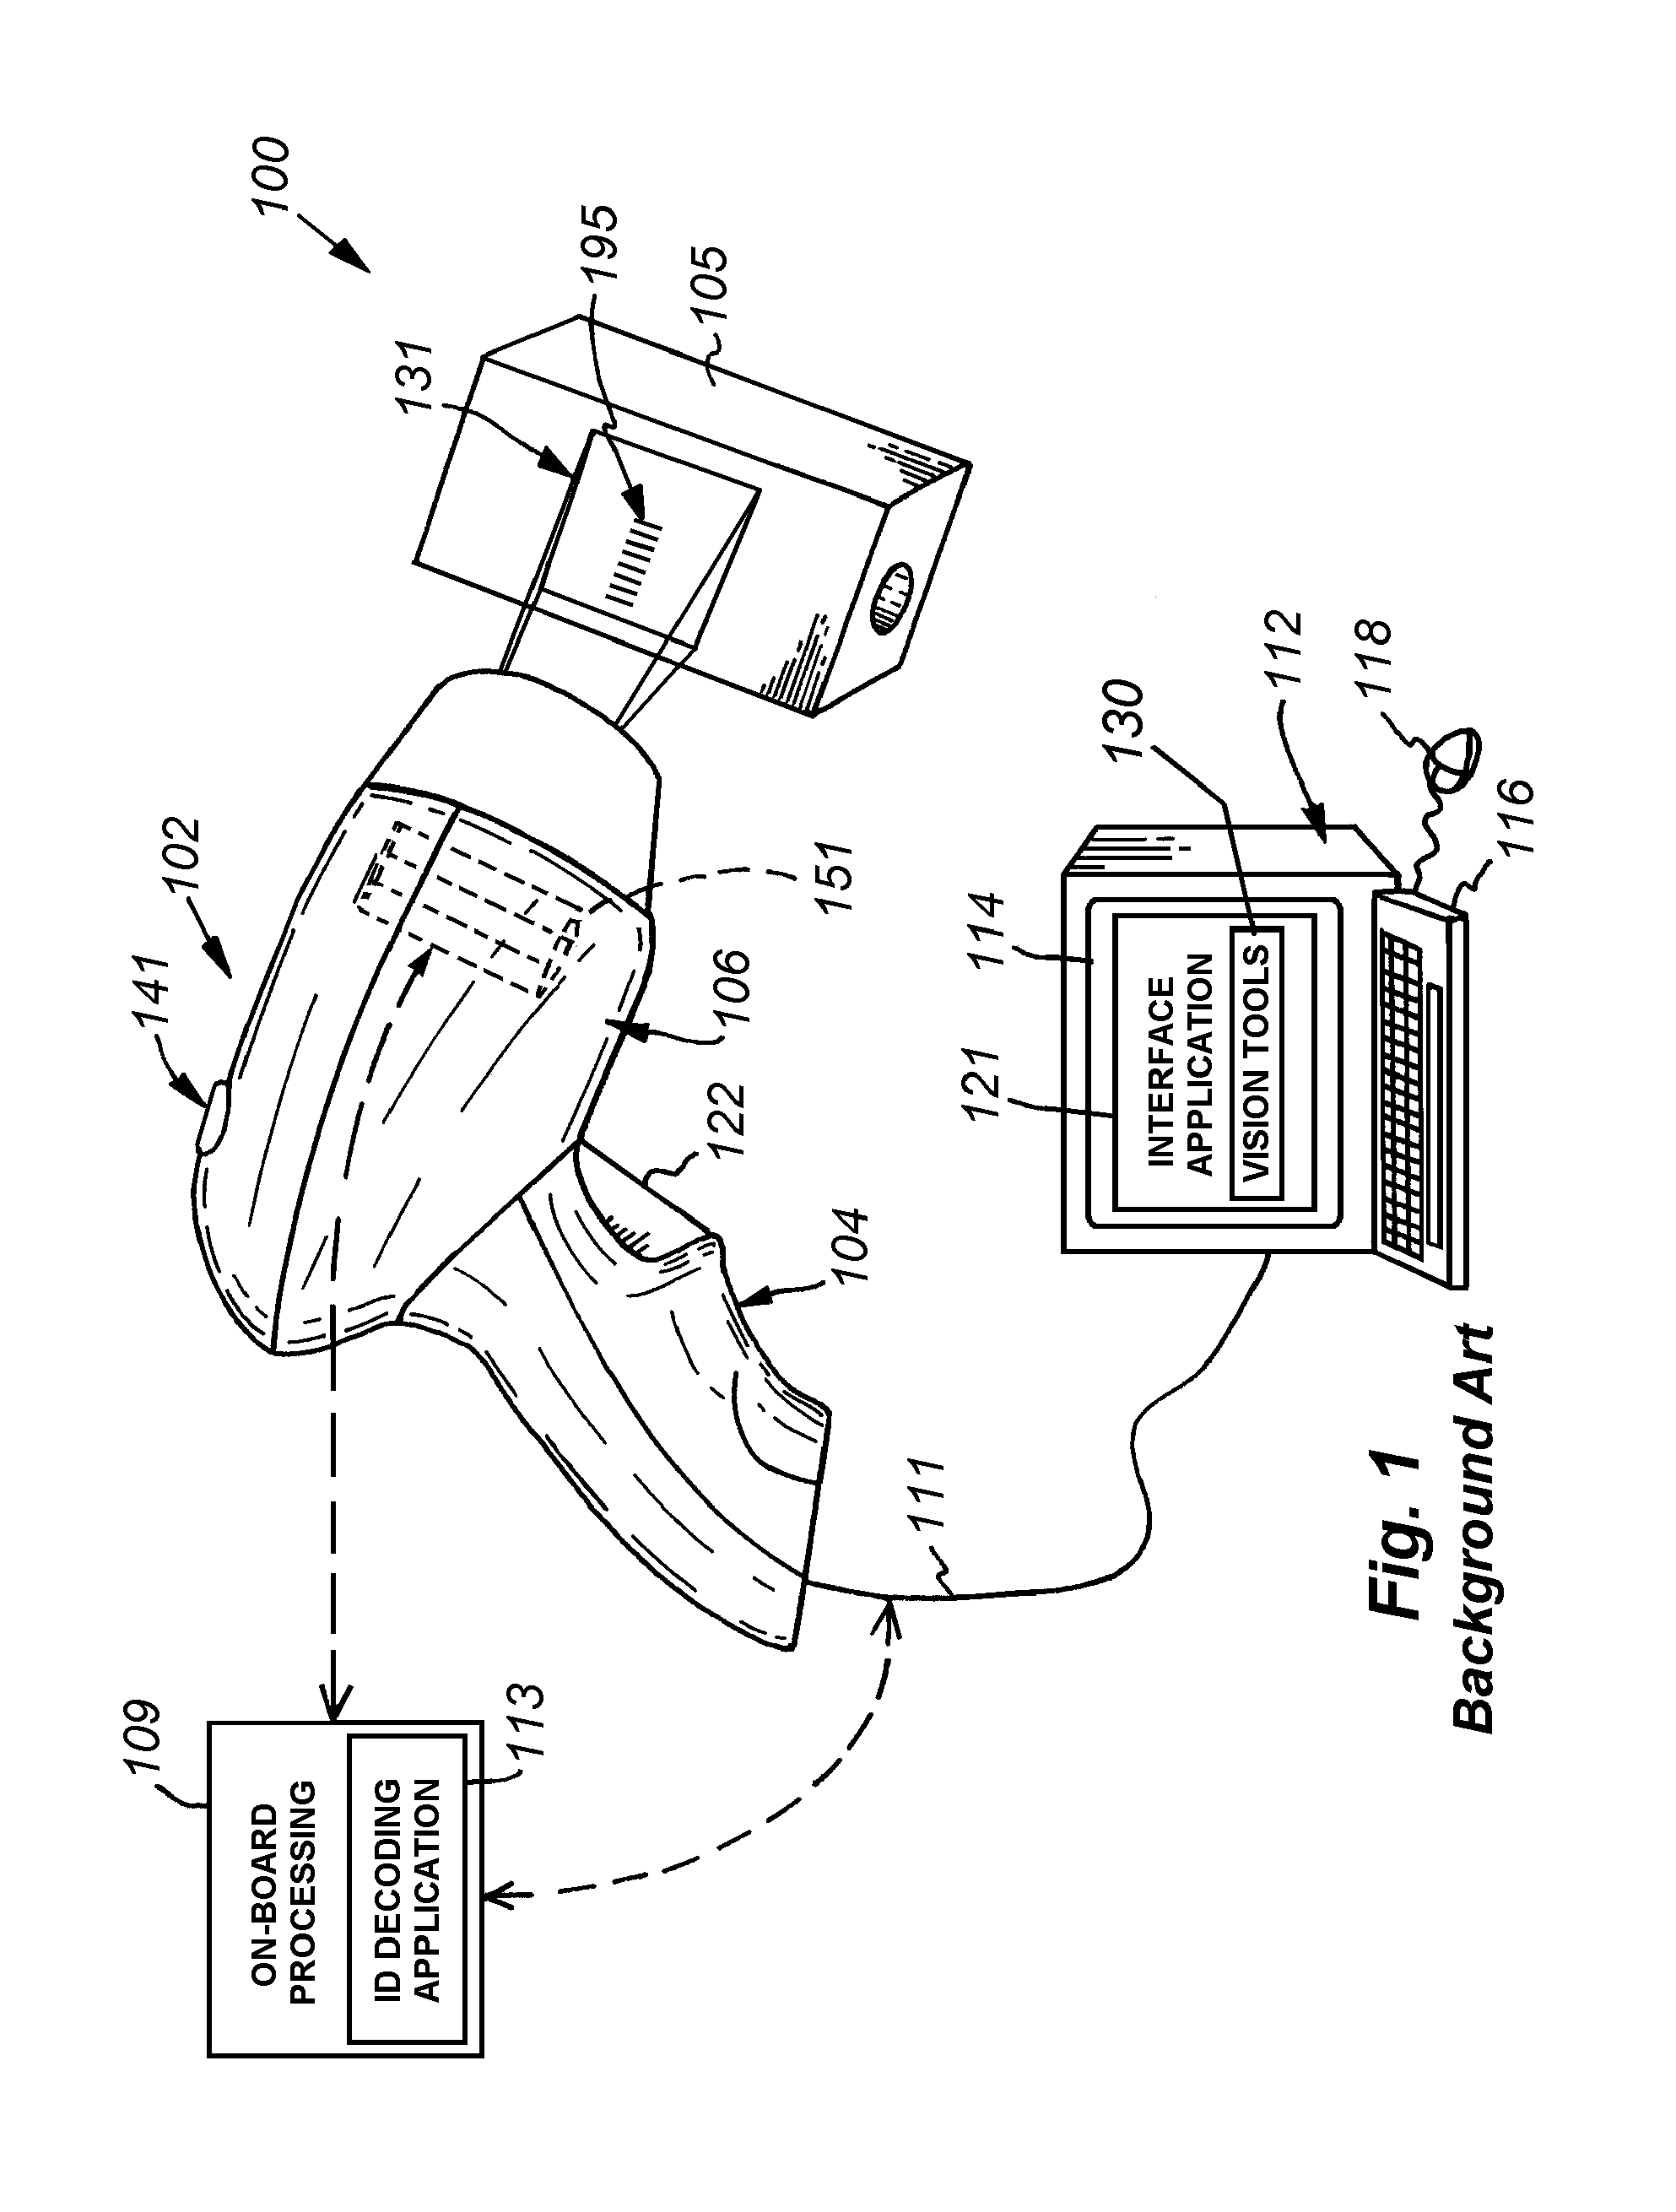 System and method for capturing and detecting symbology features and parameters